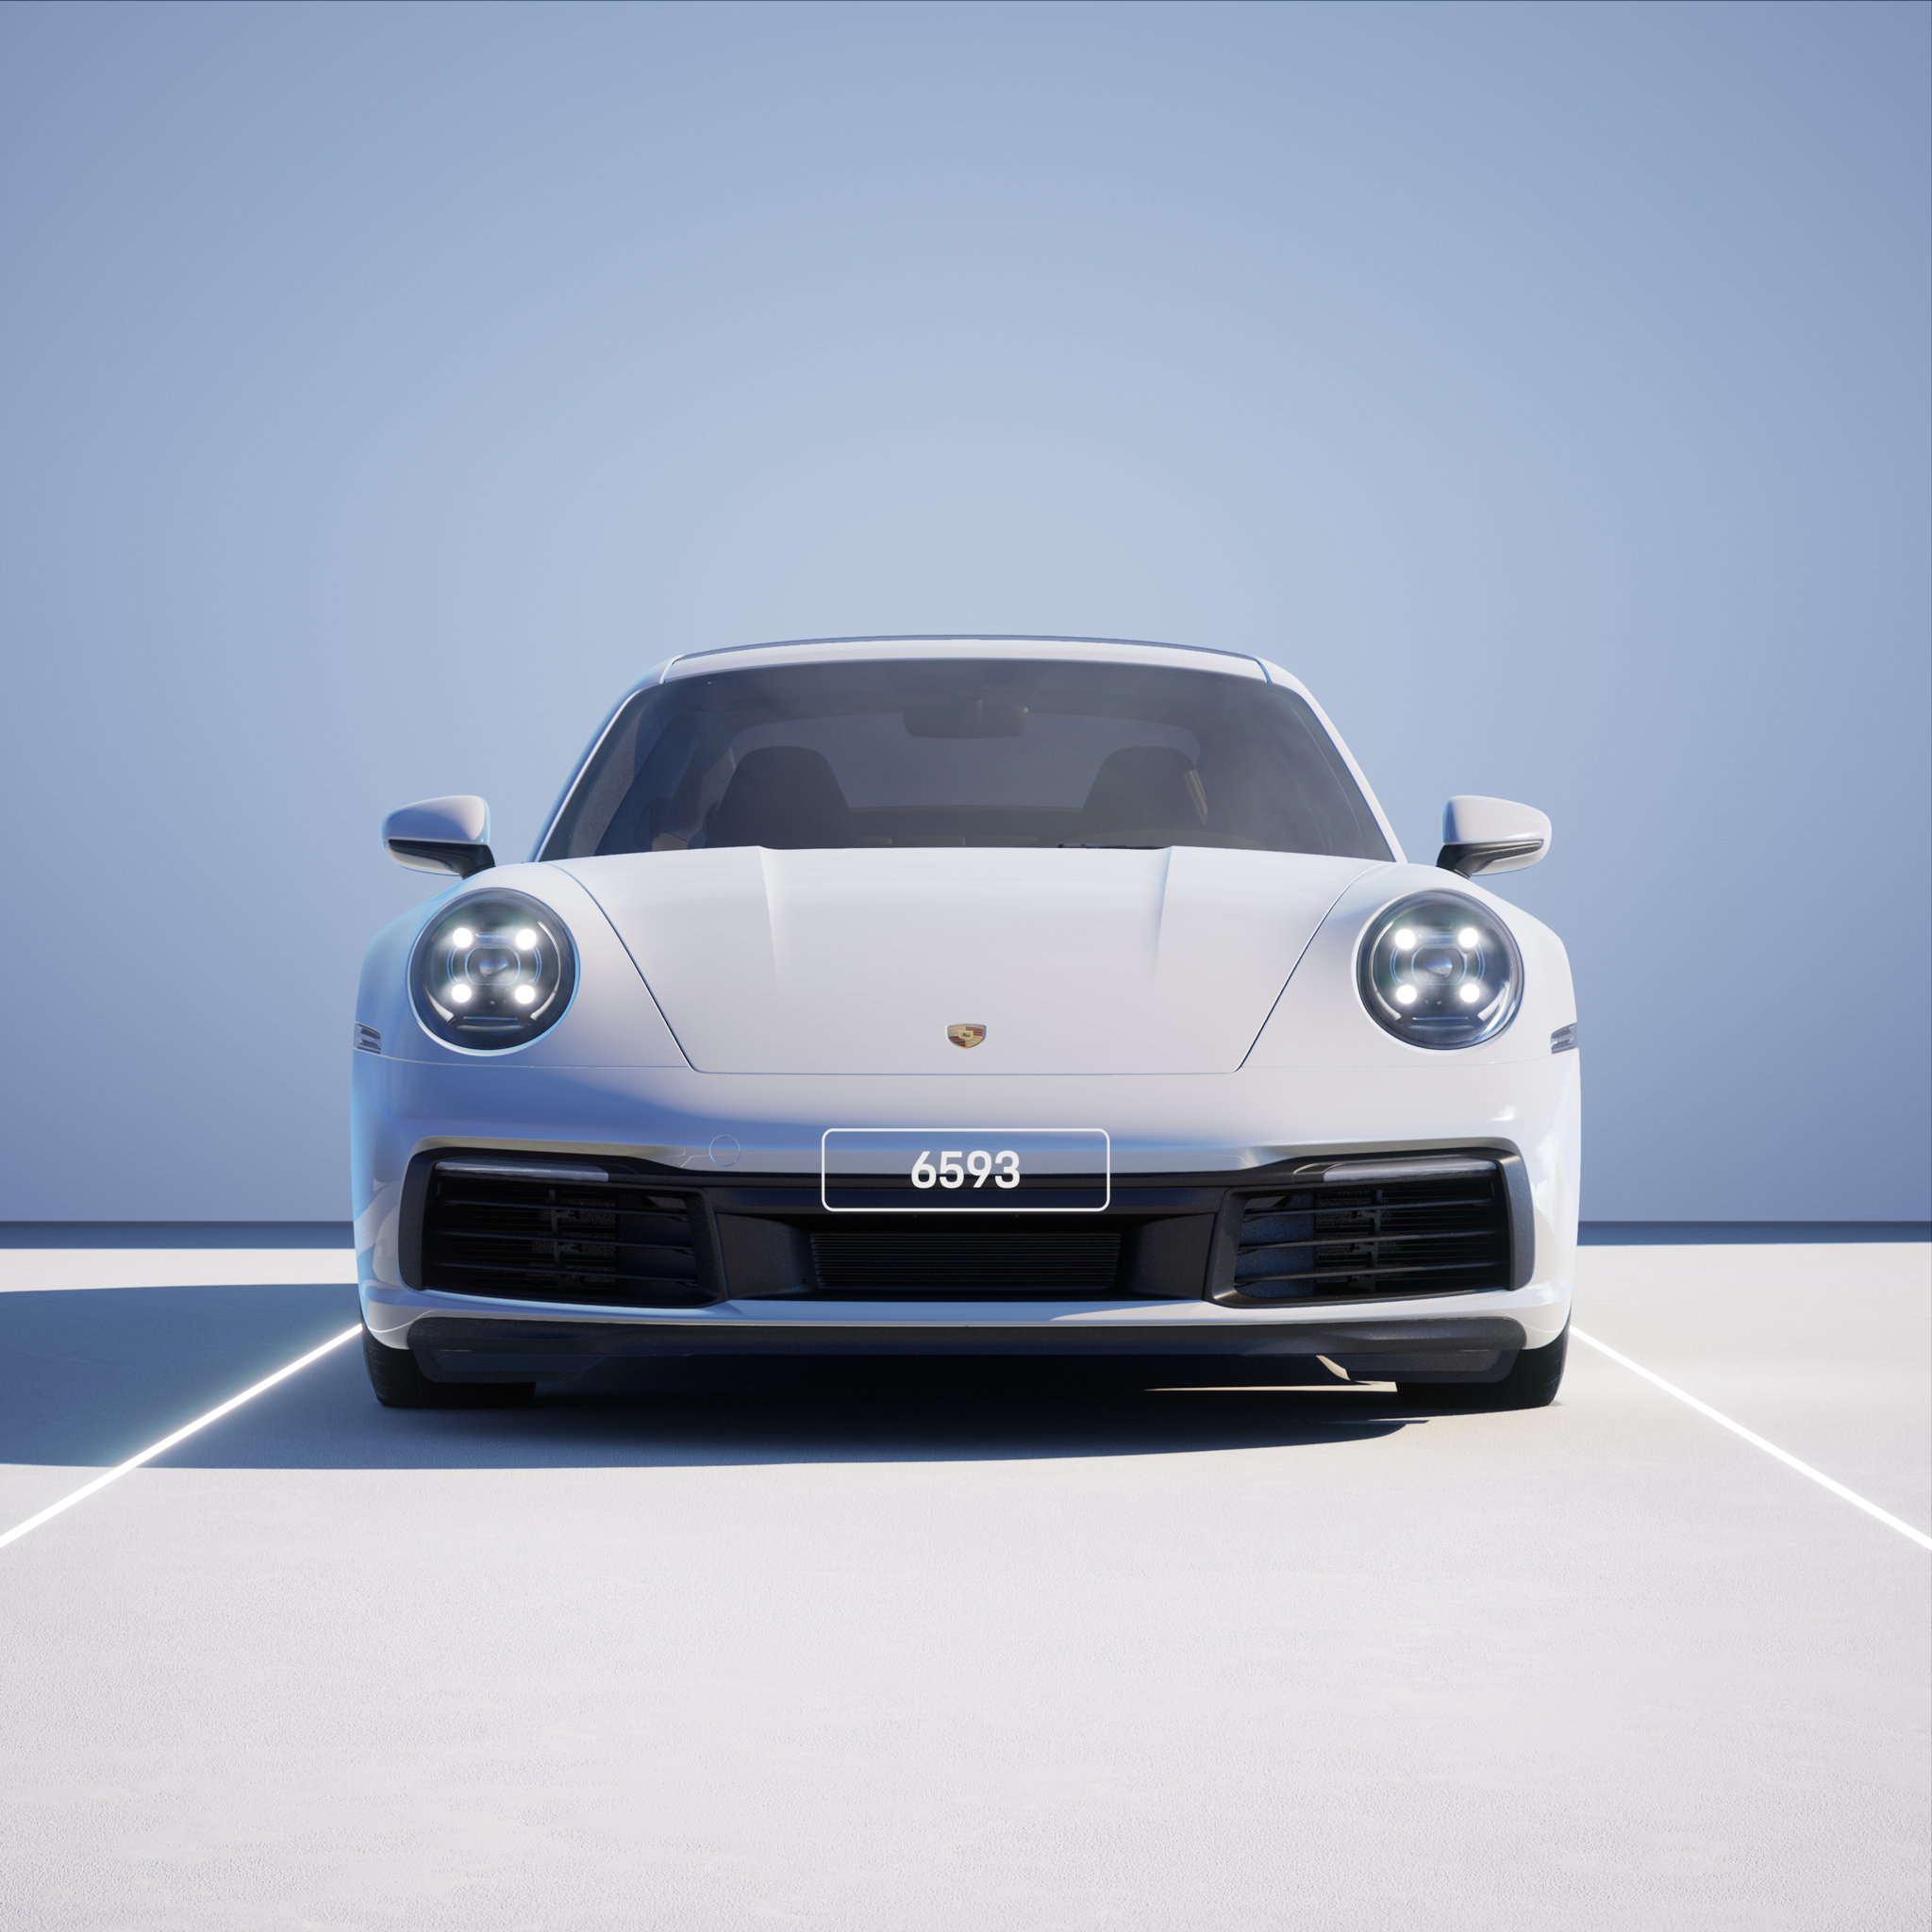 The PORSCHΞ 911 6593 image in phase